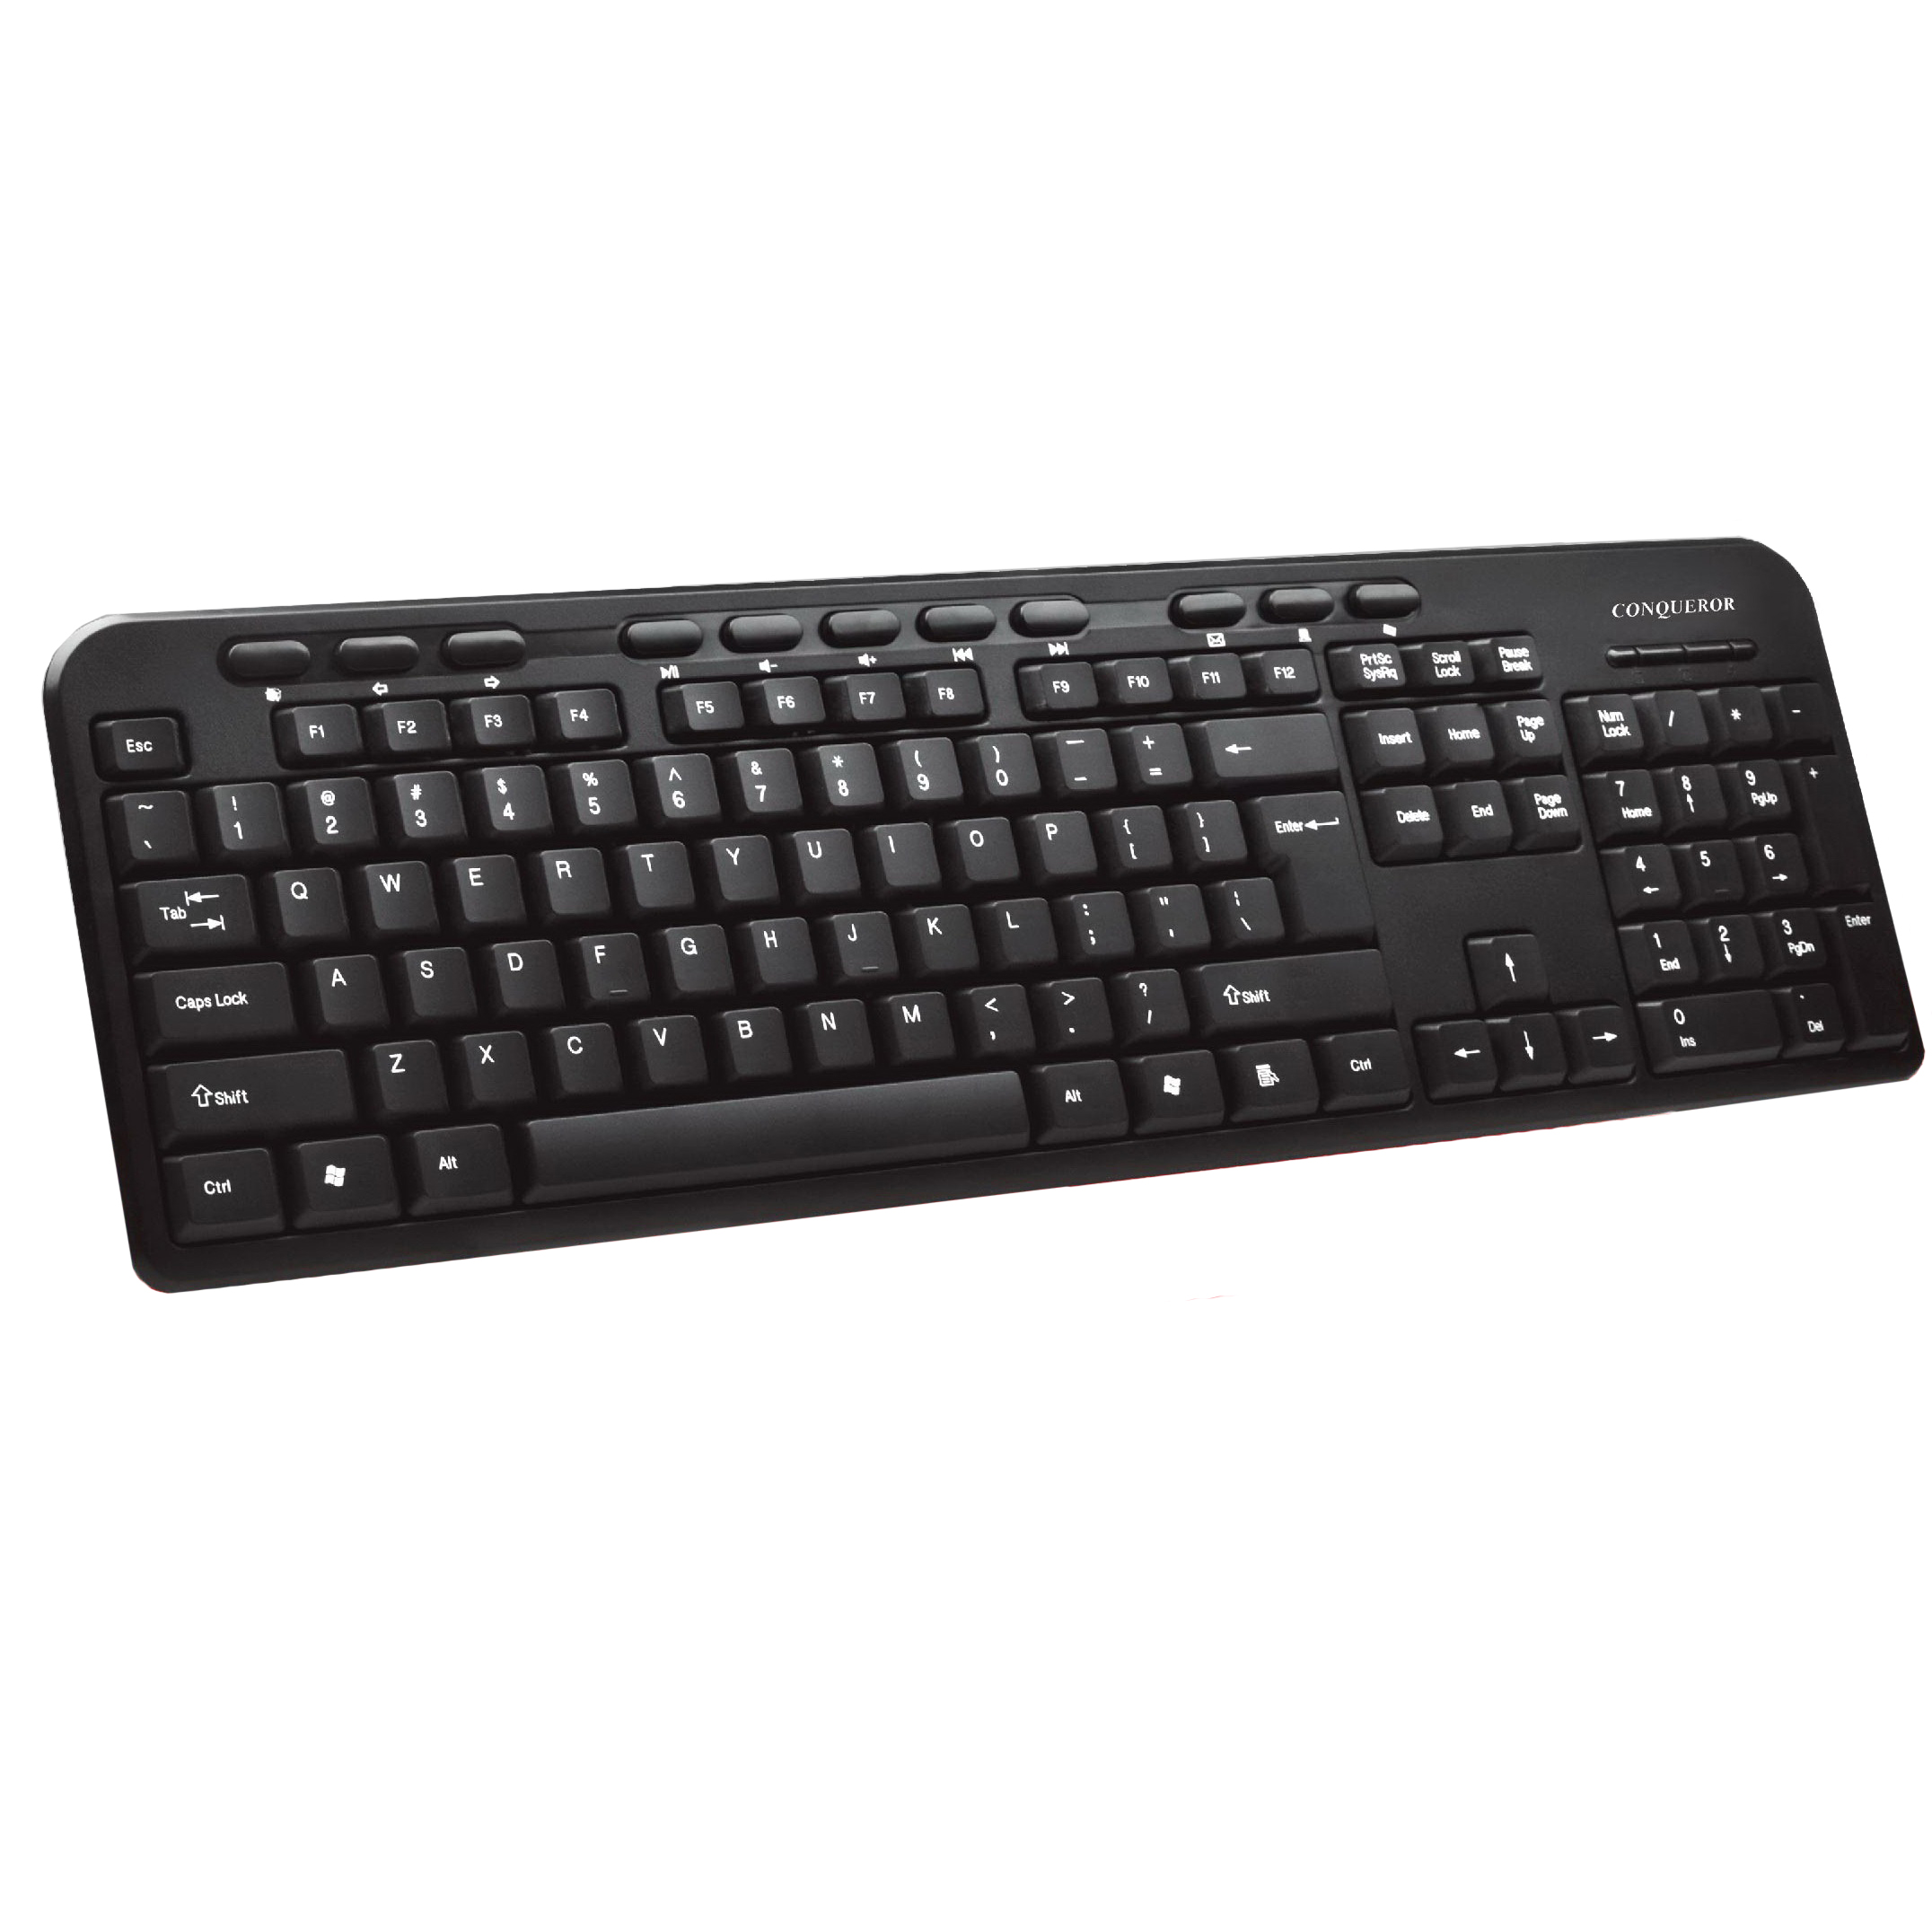 Conqueror Wired Keyboard Arabic and English for Desktop Computer PC Laptop - P368